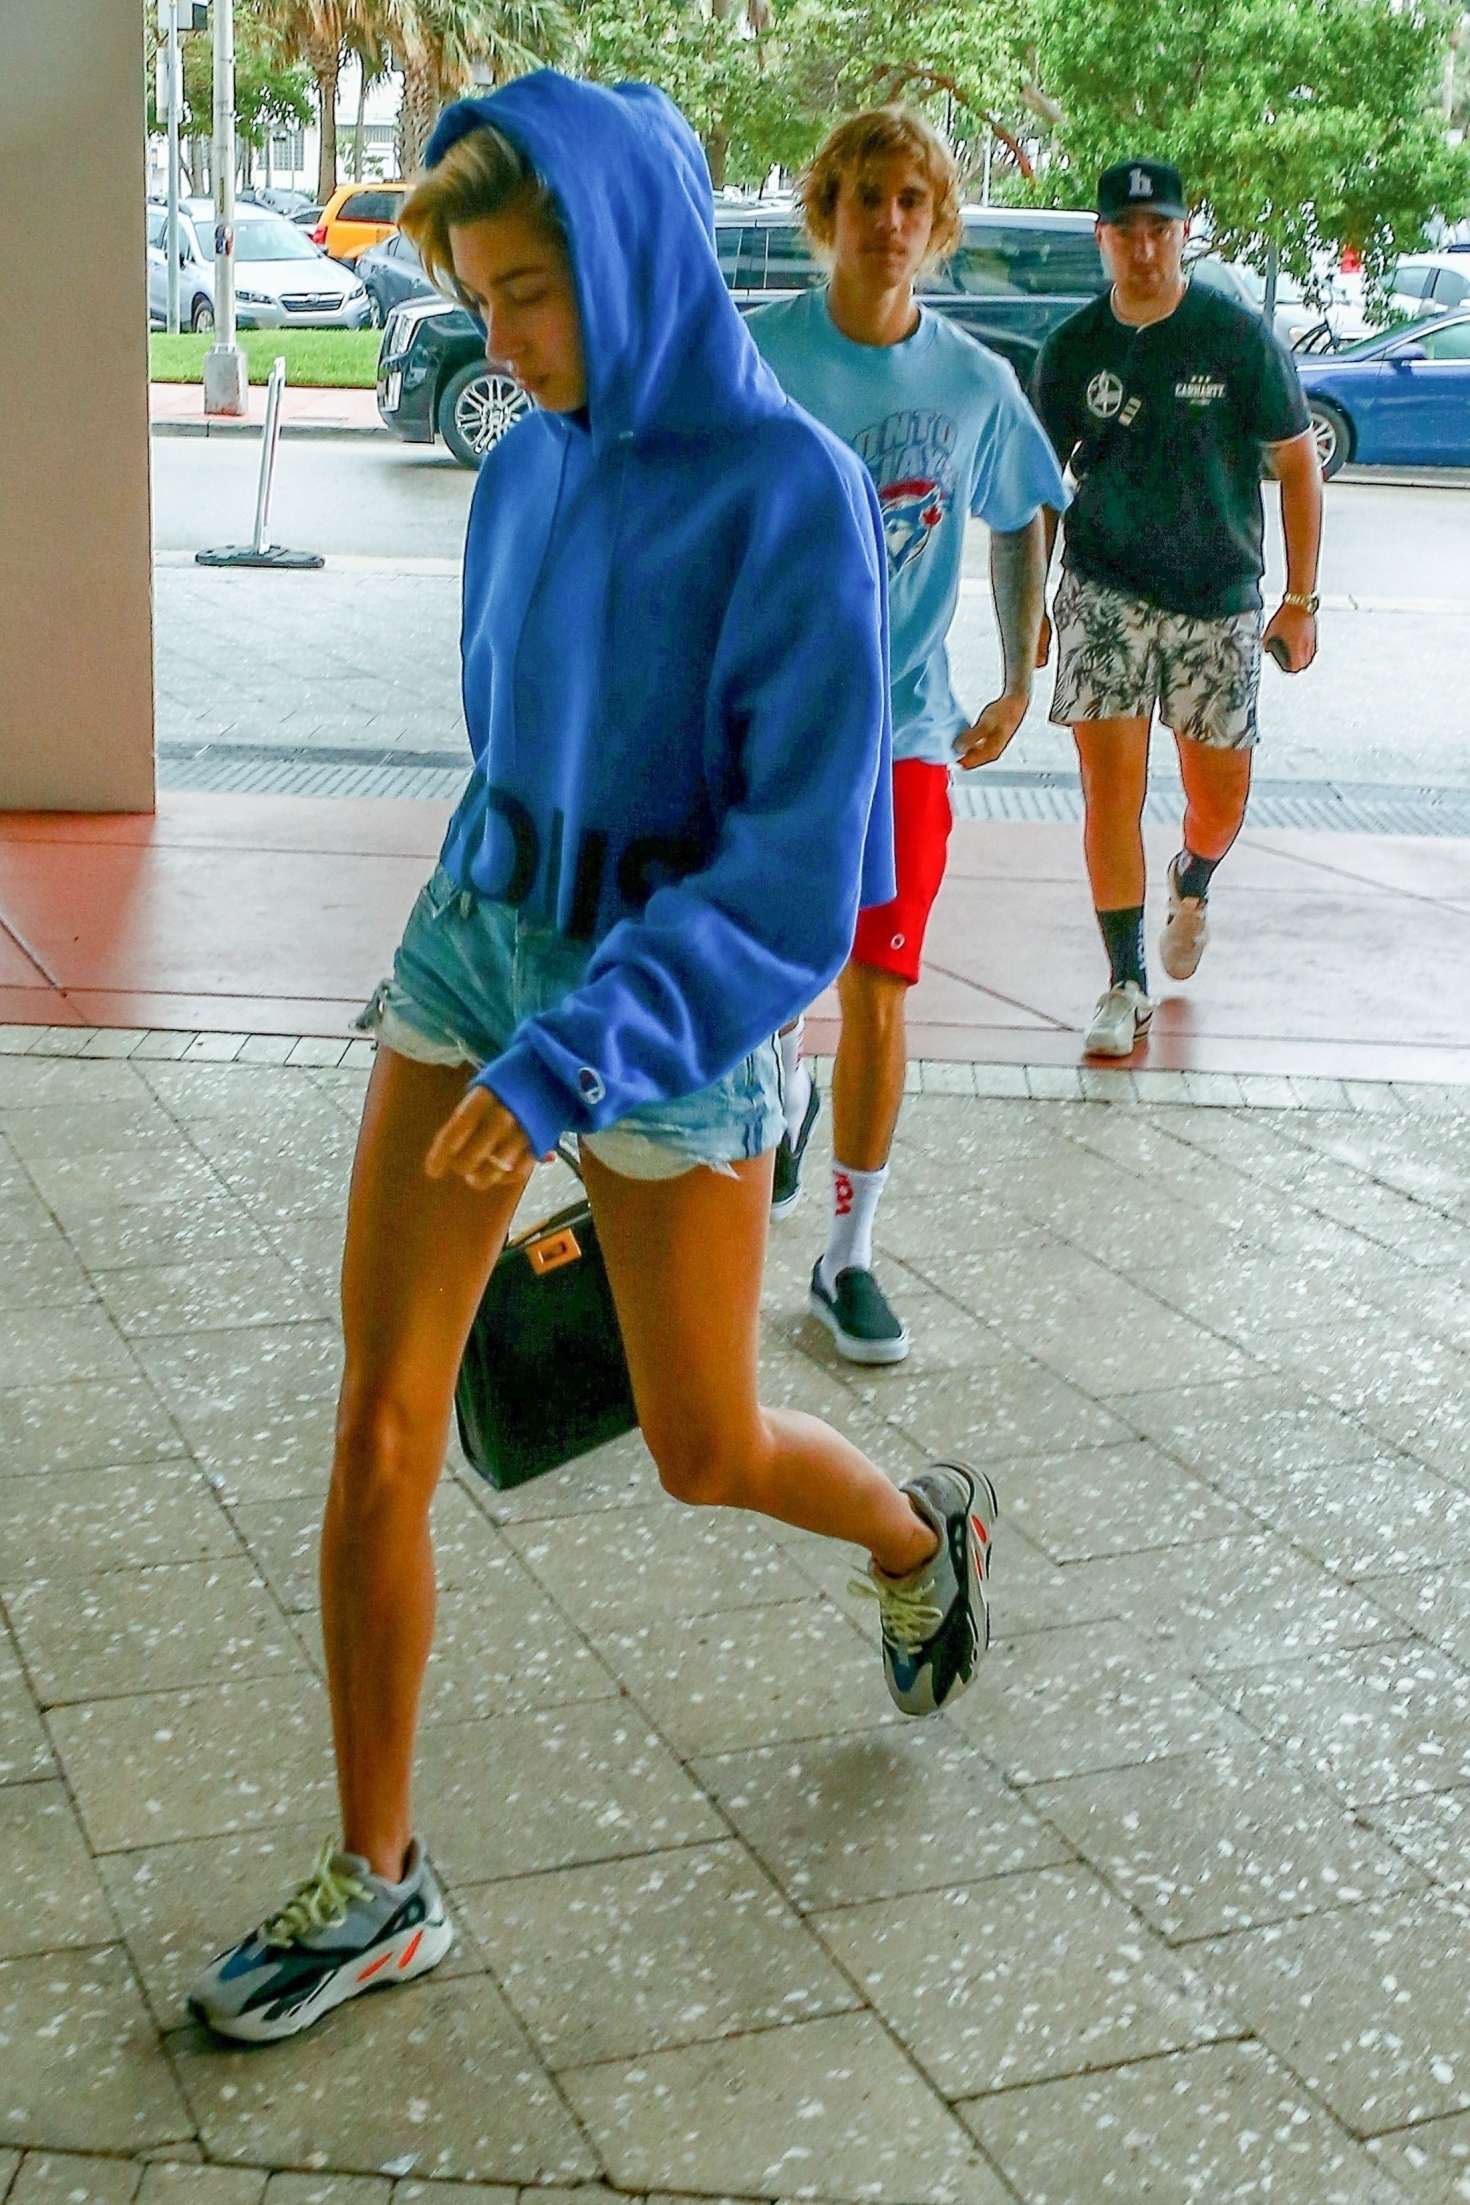 Justin Bieber and Hailey Baldwin at W Hotel in Miami